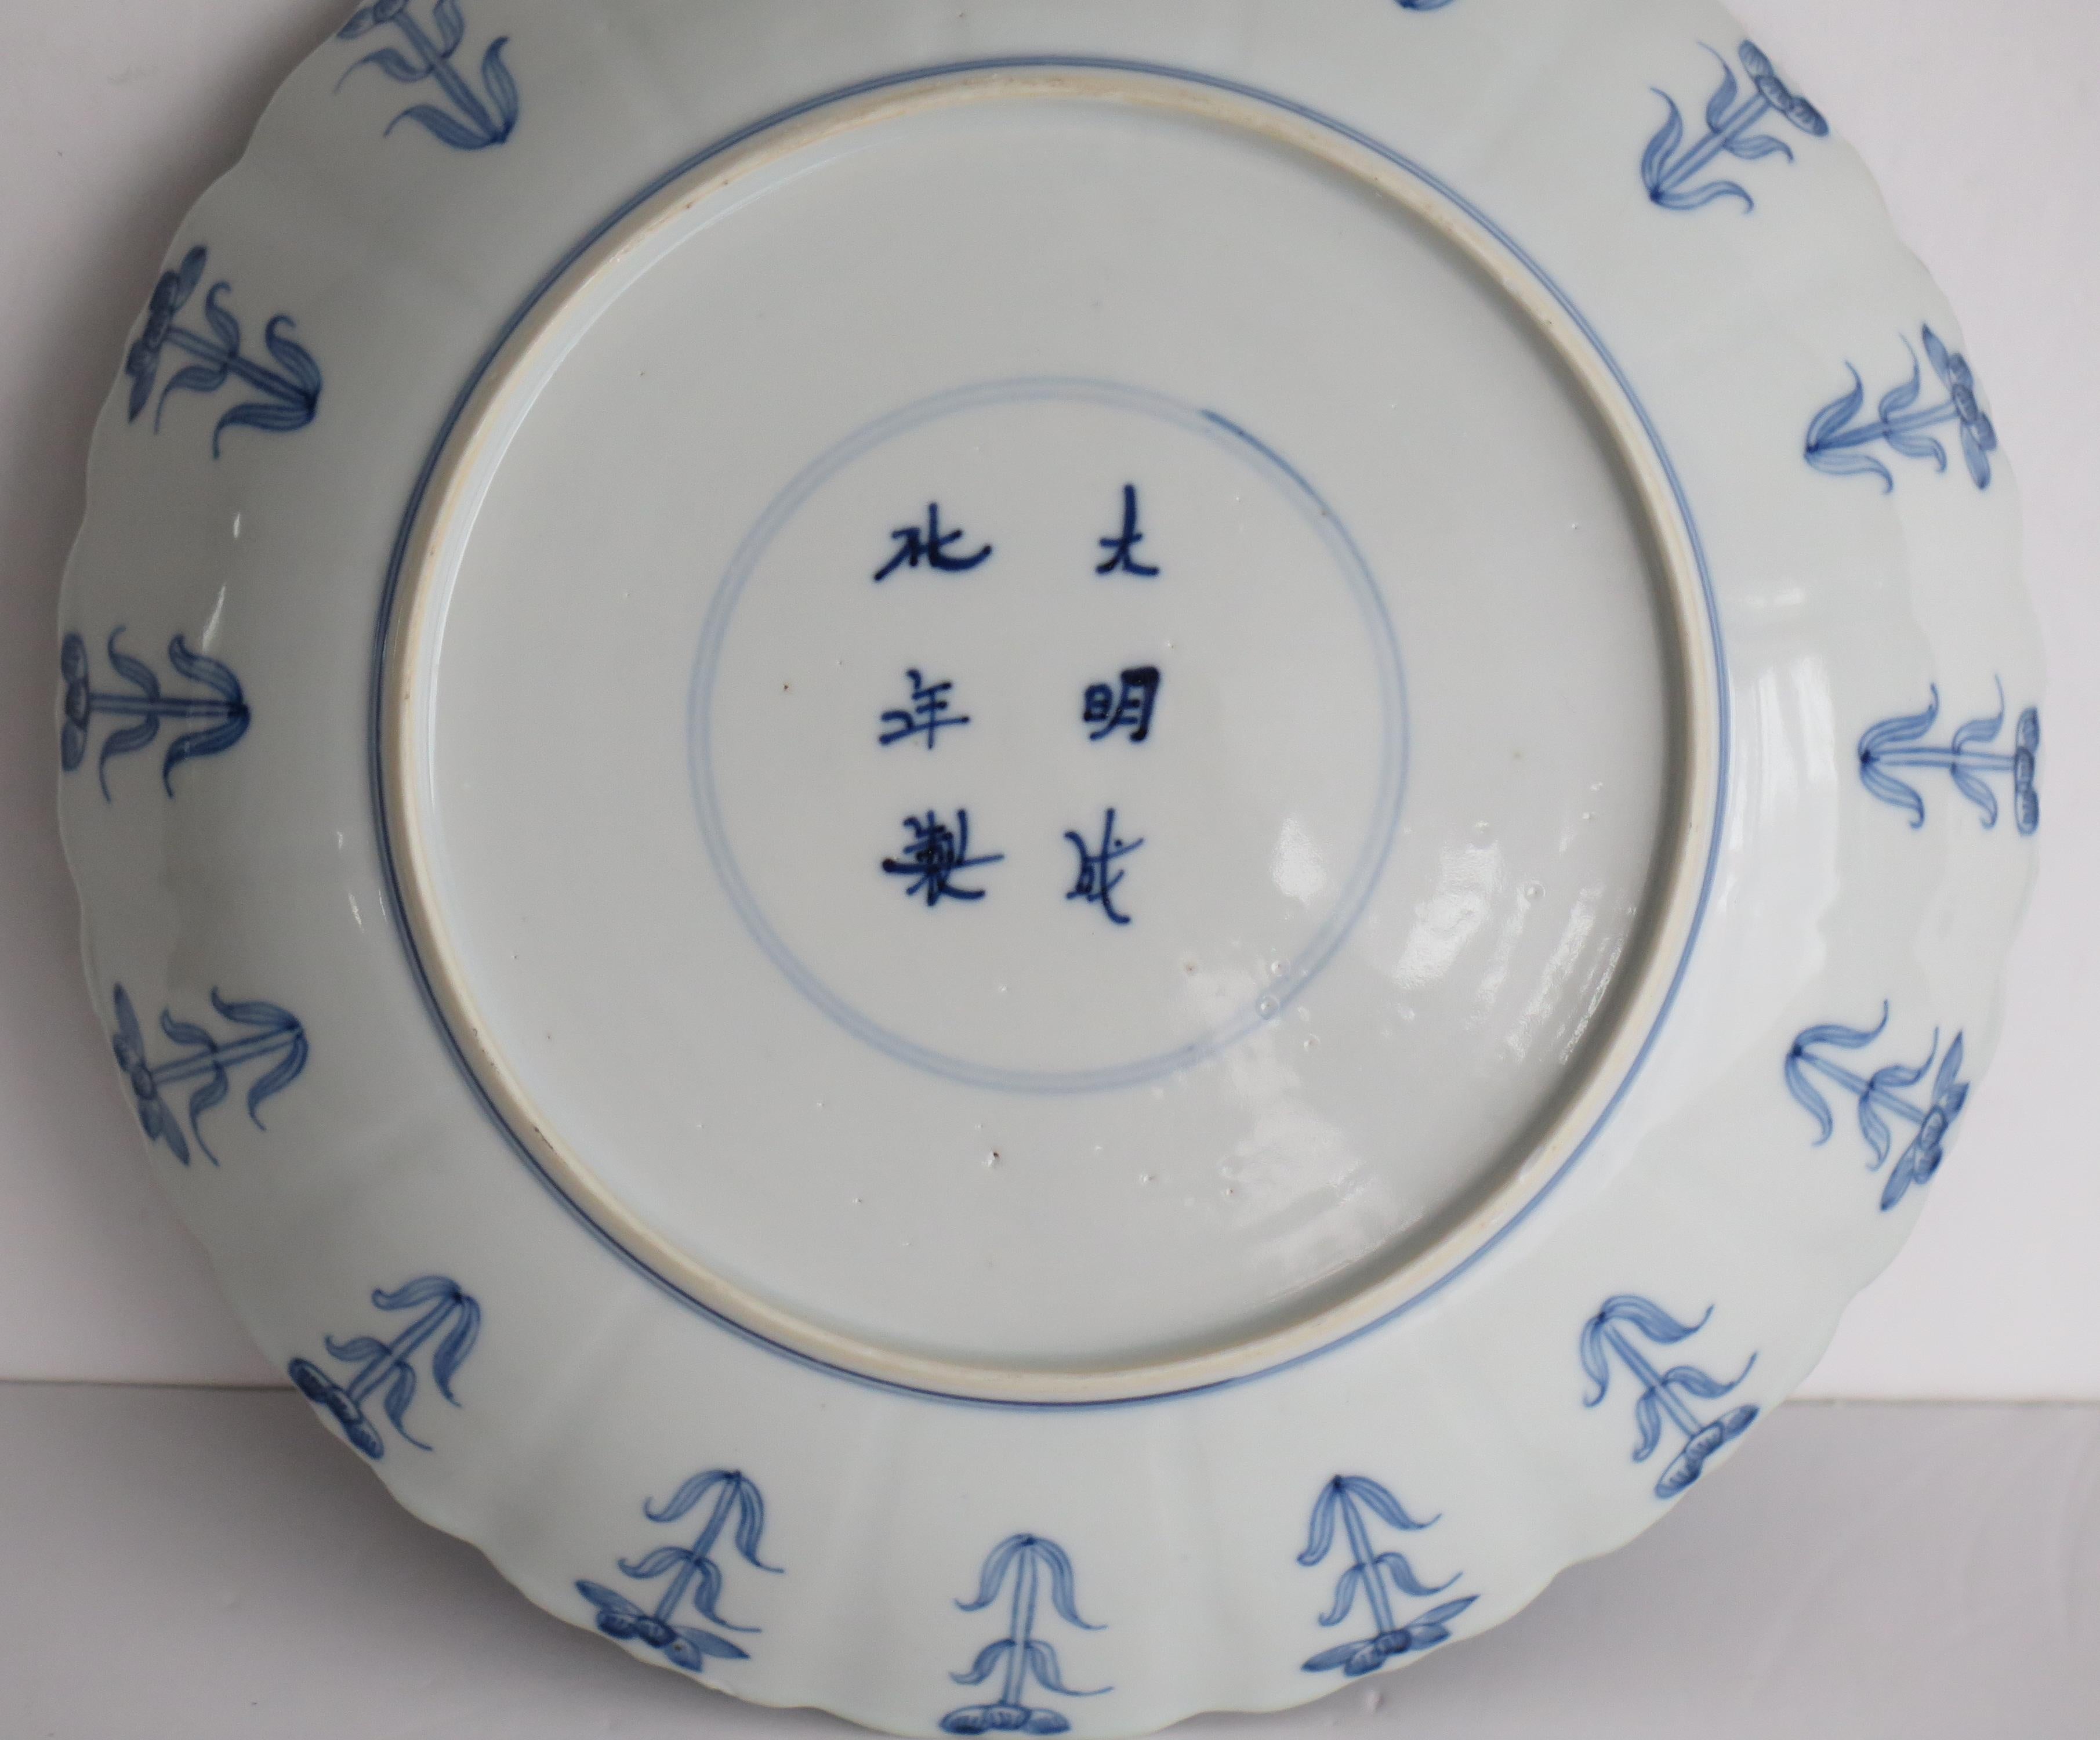 Kangxi Period Chinese Dish or Plate Porcelain Blue & White Chenghua Mark Ca 1680 For Sale 3